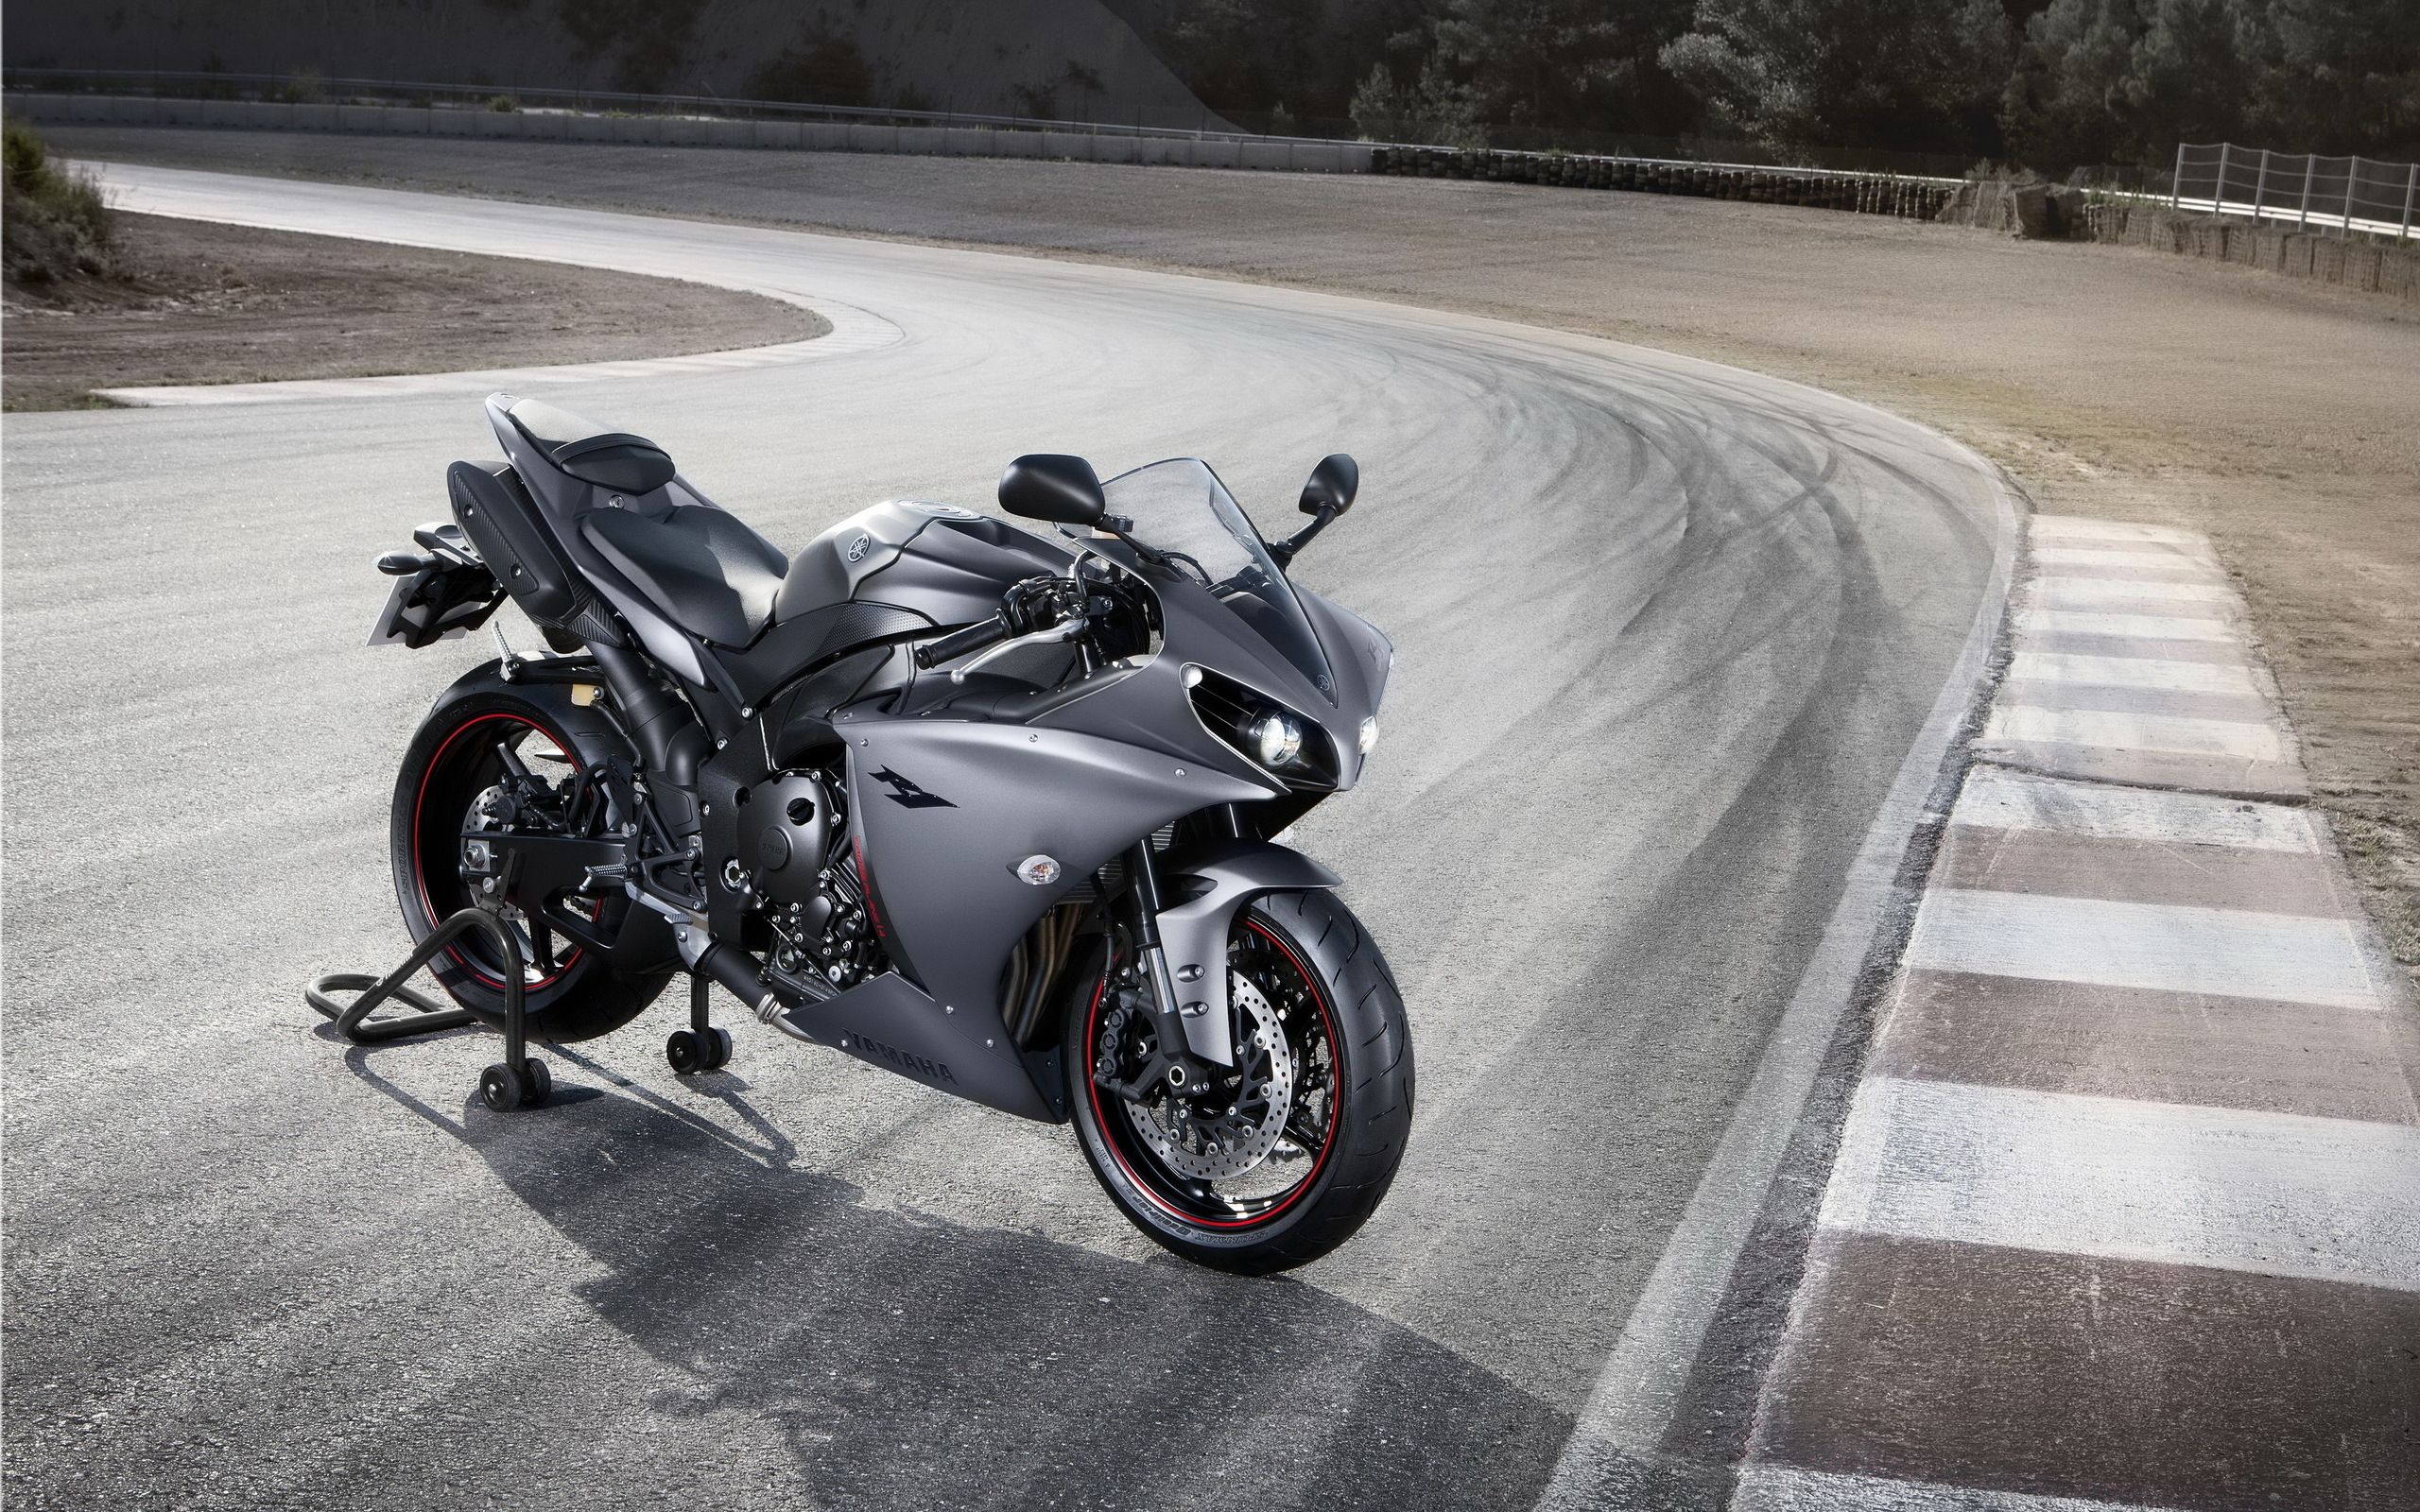 Yamaha YZF-R1 wallpapers and images - wallpapers, pictures, photos